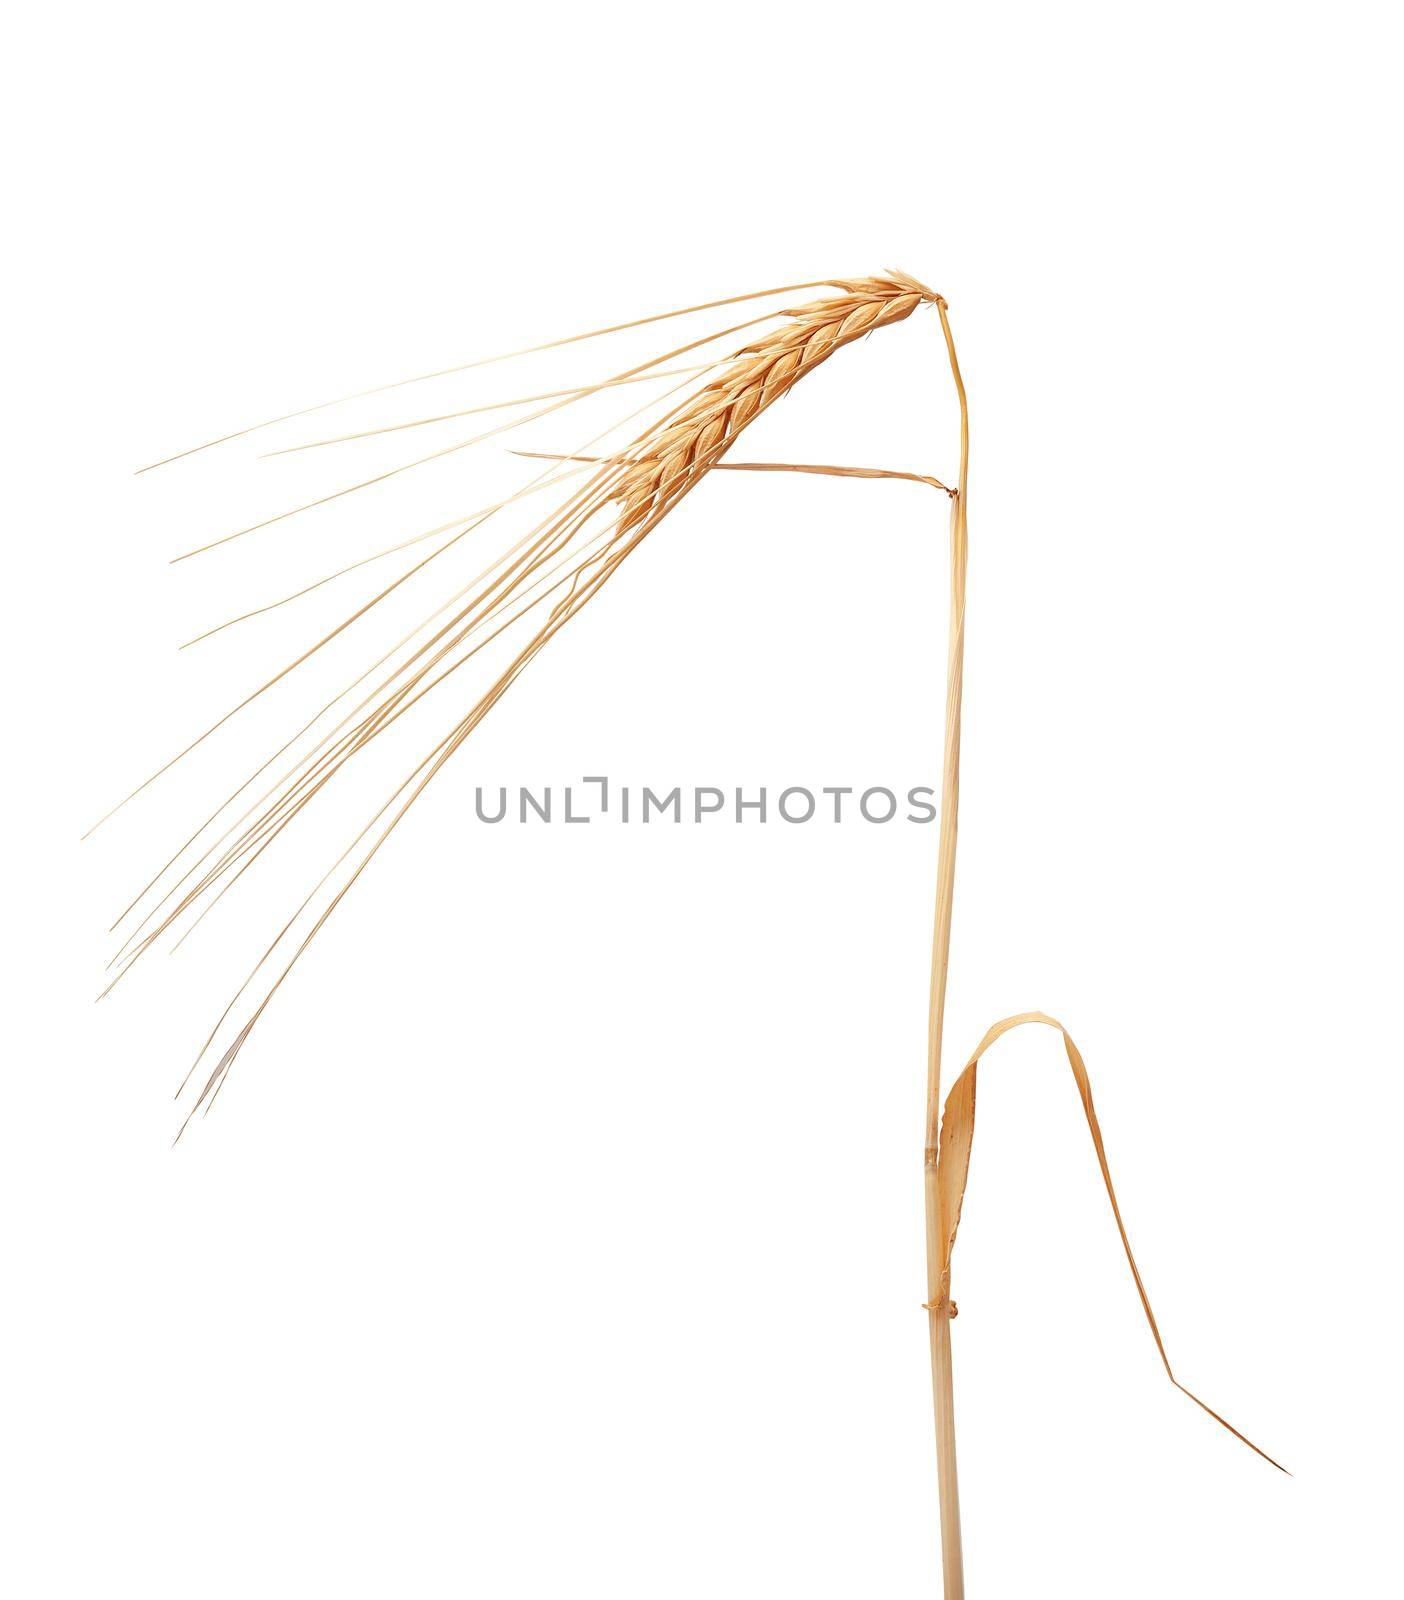 Spikelet of barley by Angorius